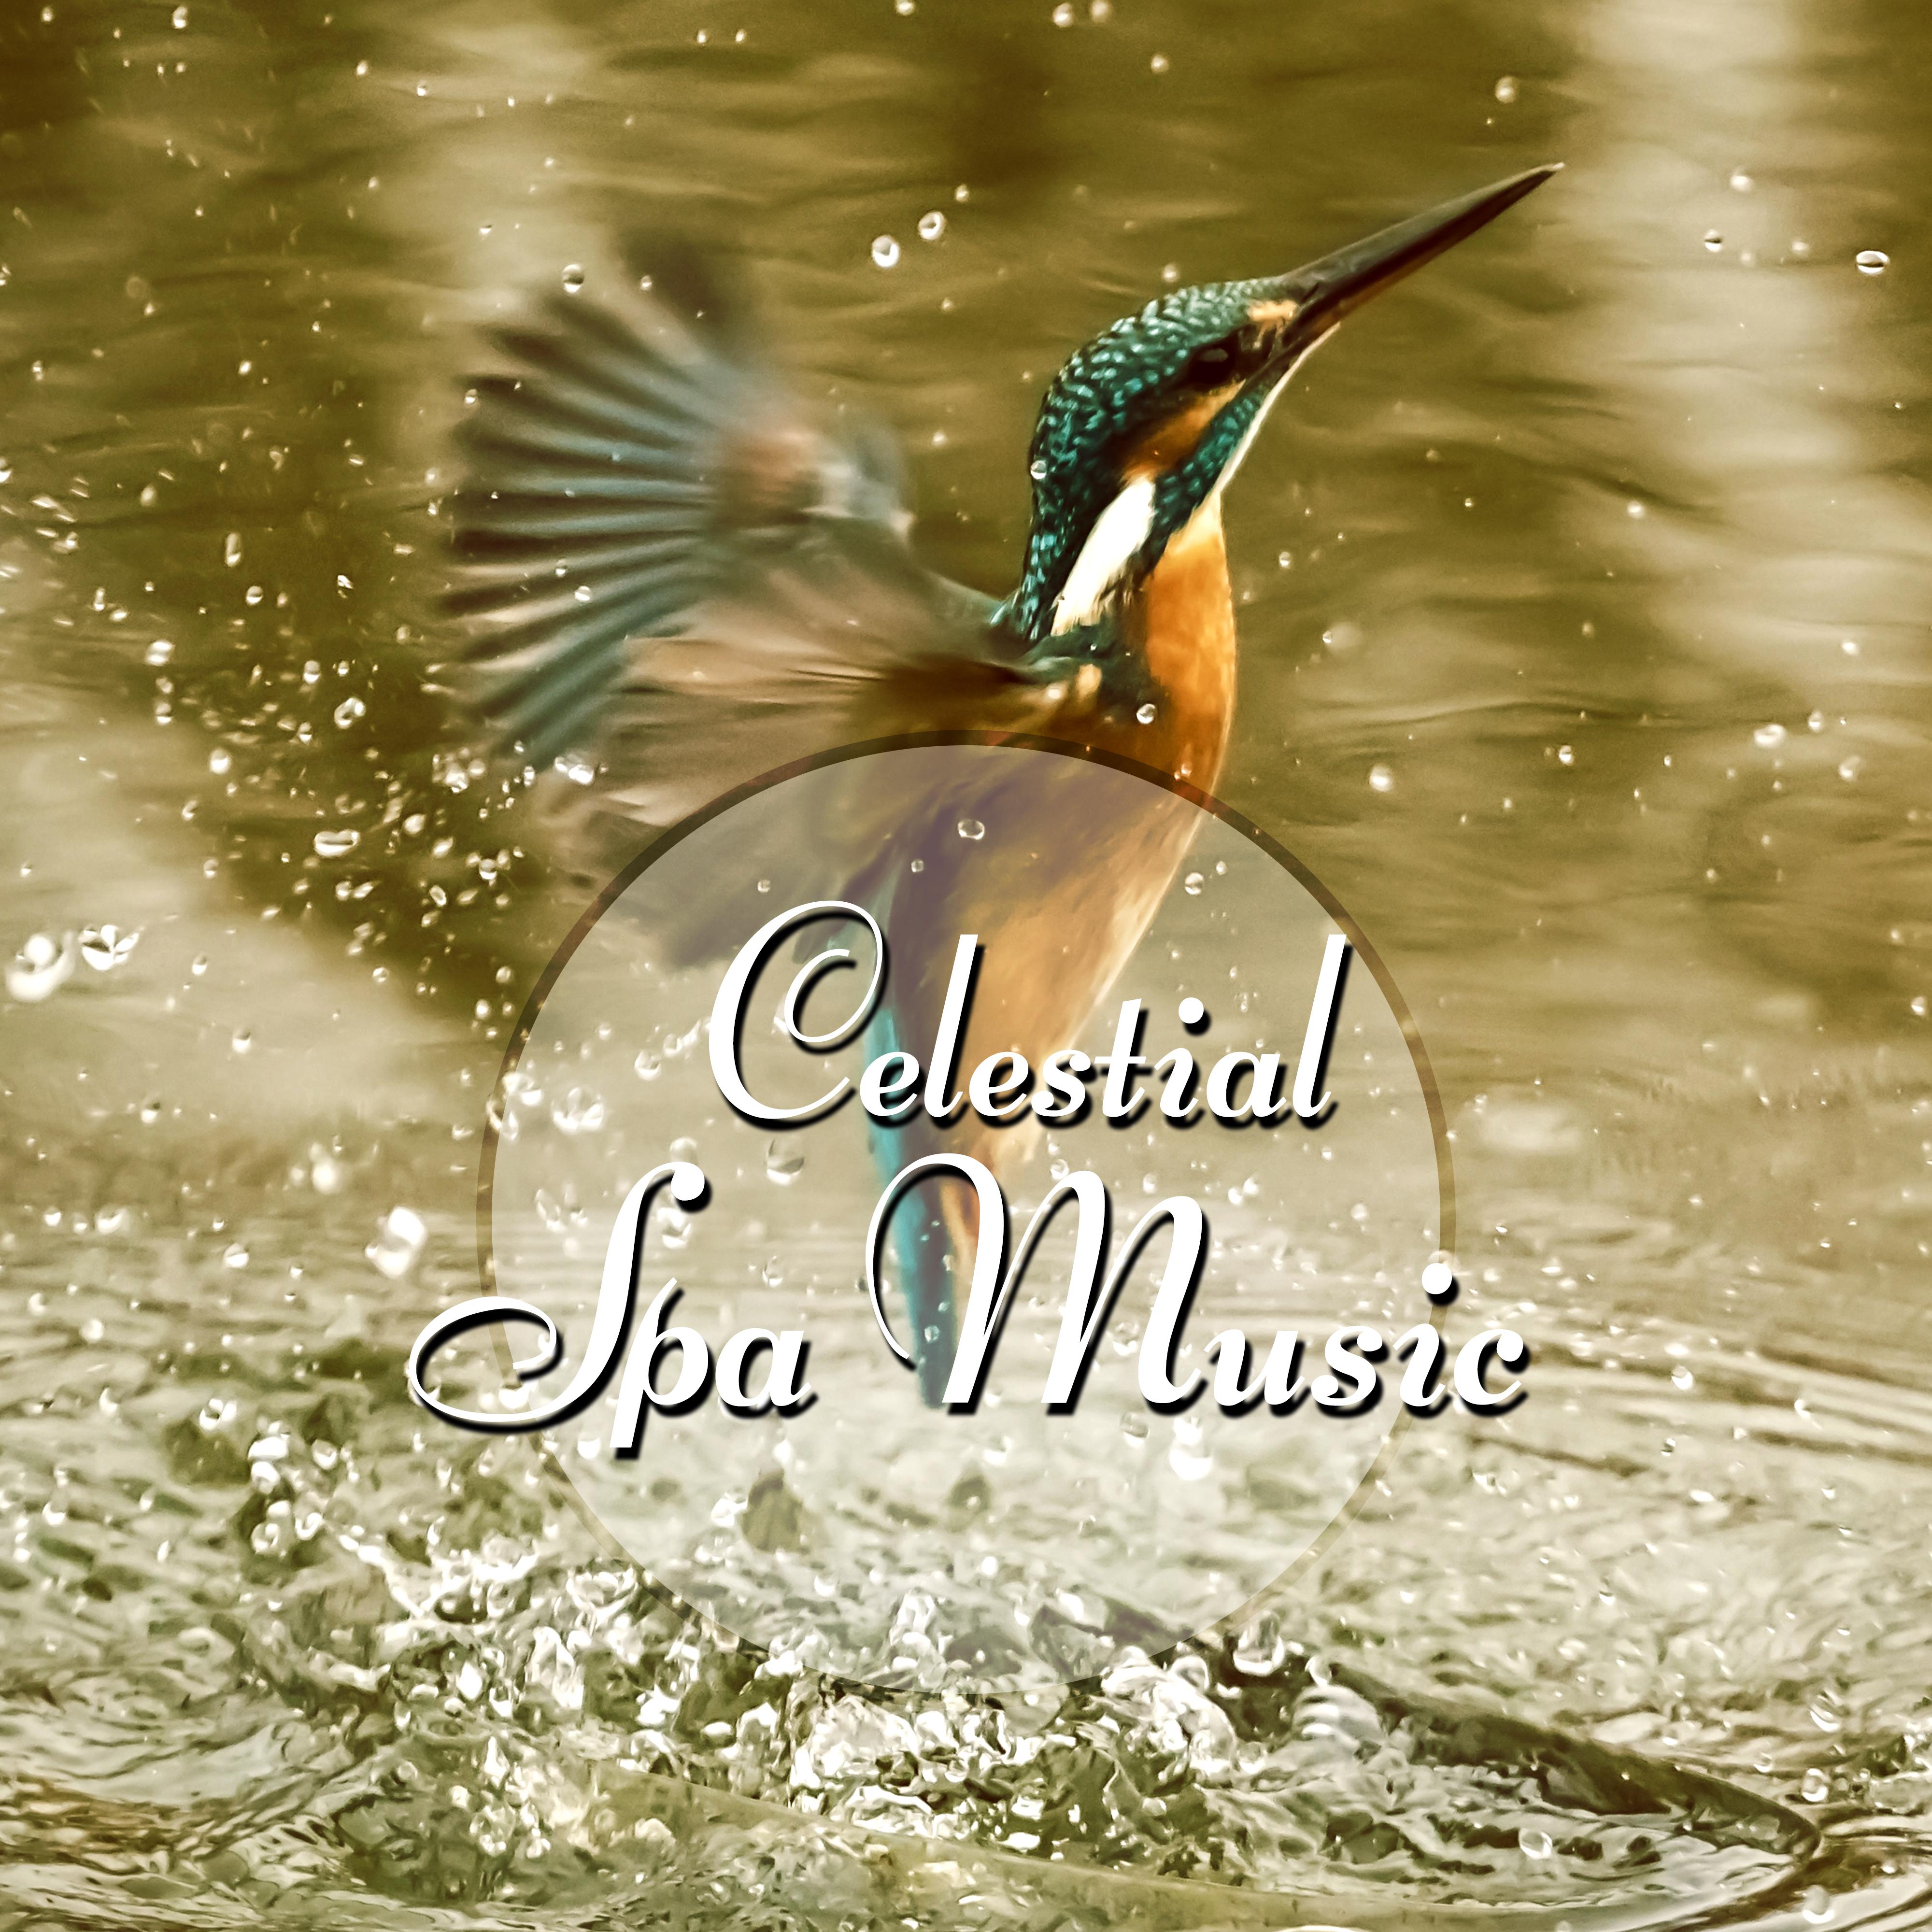 Celestial Spa Music - Relaxing Background Music for Spa the Wellness Center, Piano Music and Sounds of Nature Music for Relaxation, Instrumental Music for Massage Therapy, Reiki Healing, Luxury Spa